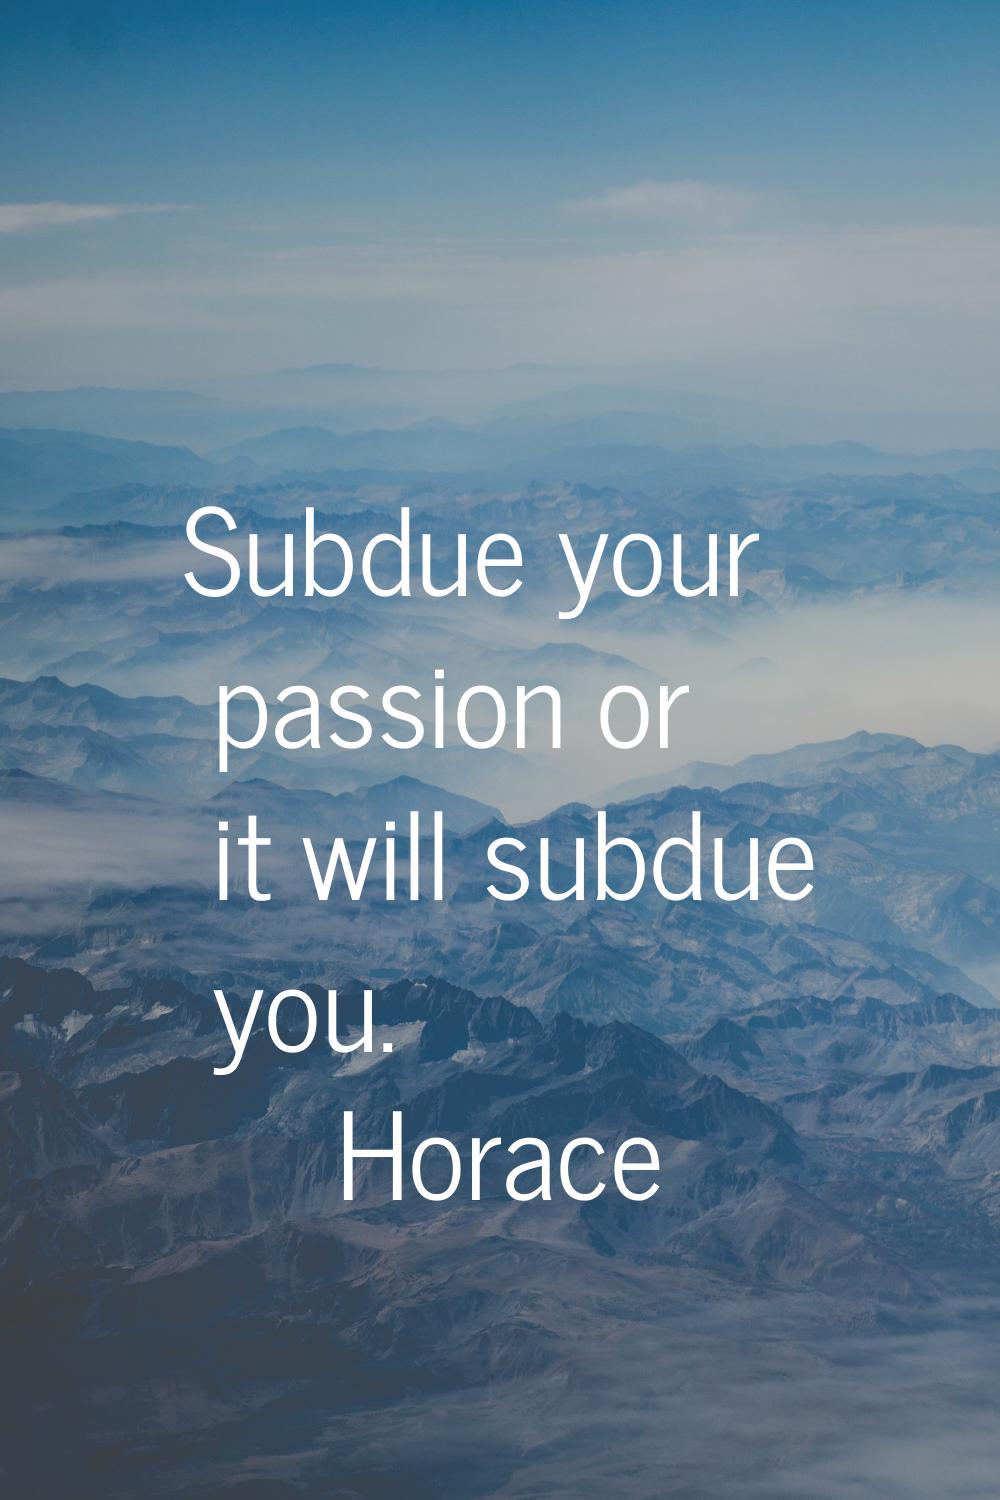 Subdue your passion or it will subdue you.